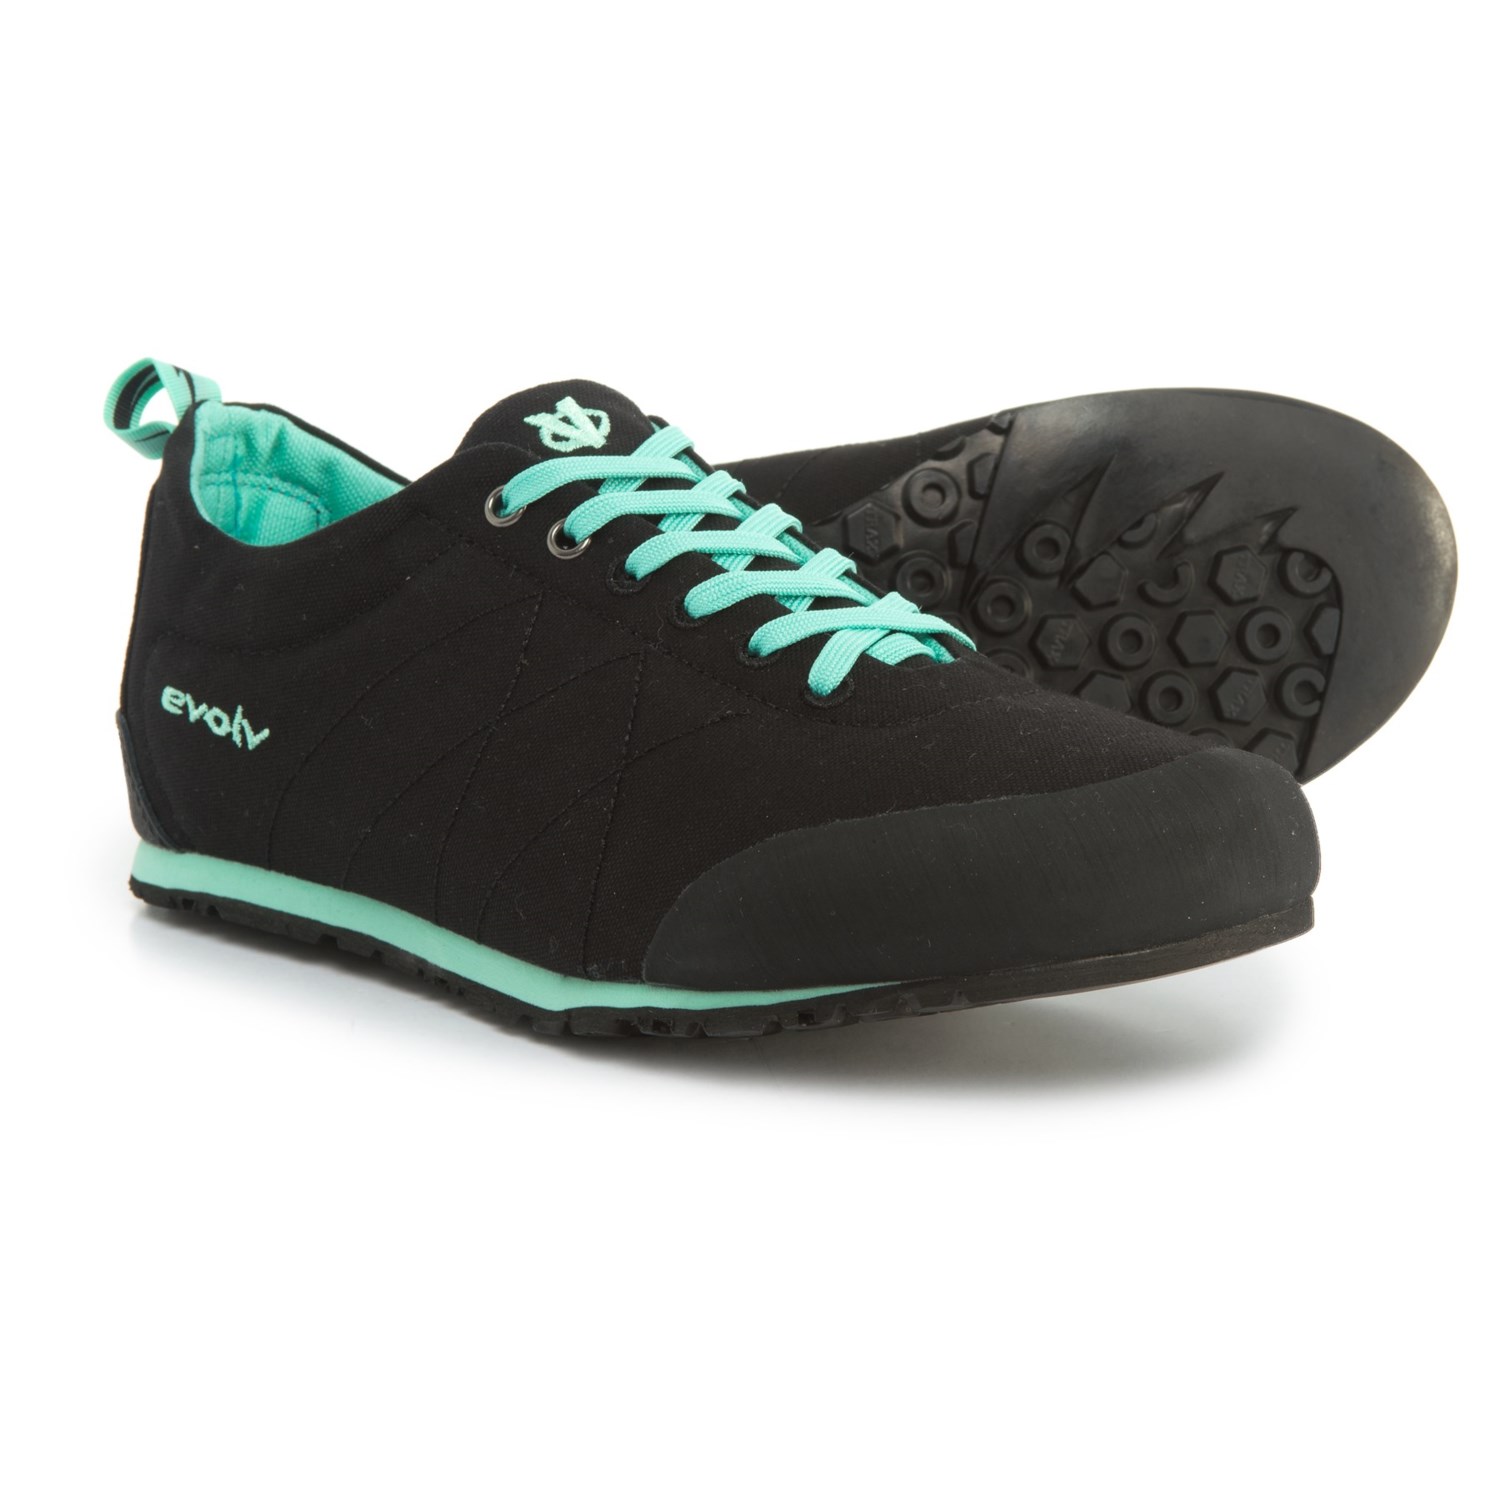 Evolv Cruzer Psyche Approach Shoes (For Women)